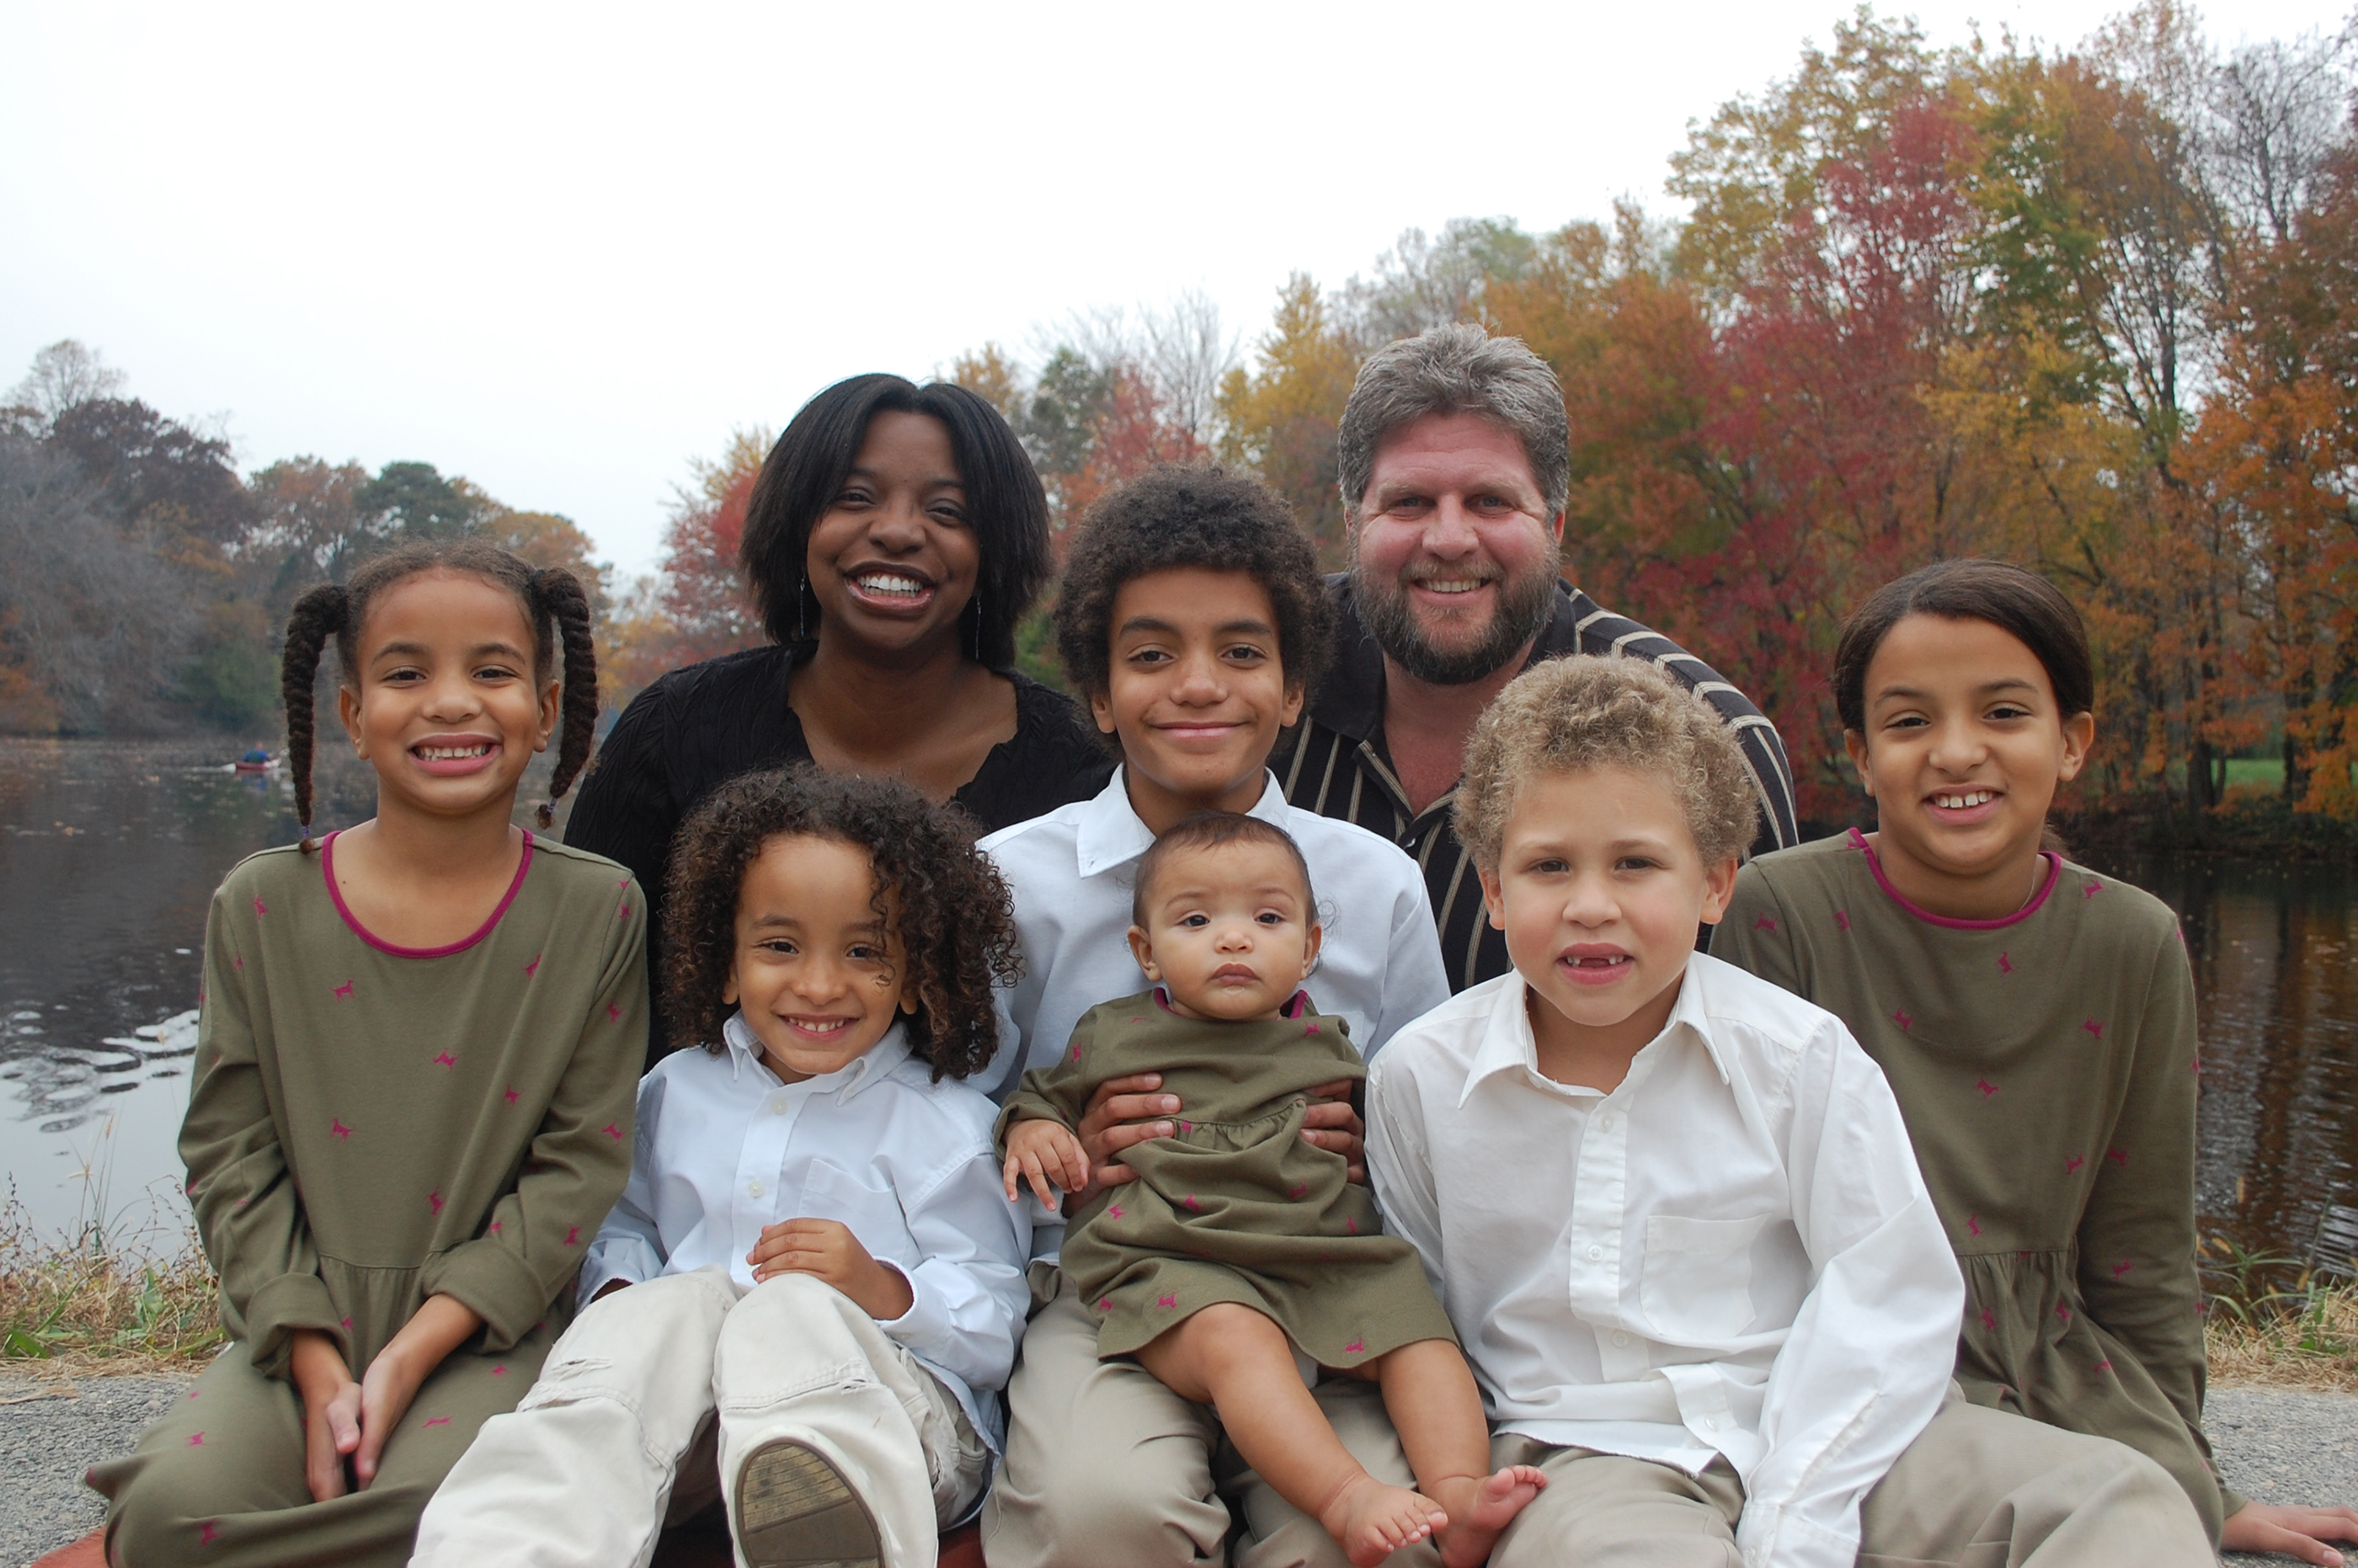 The Malones pose in 2009 in their first portrait as a family of eight.